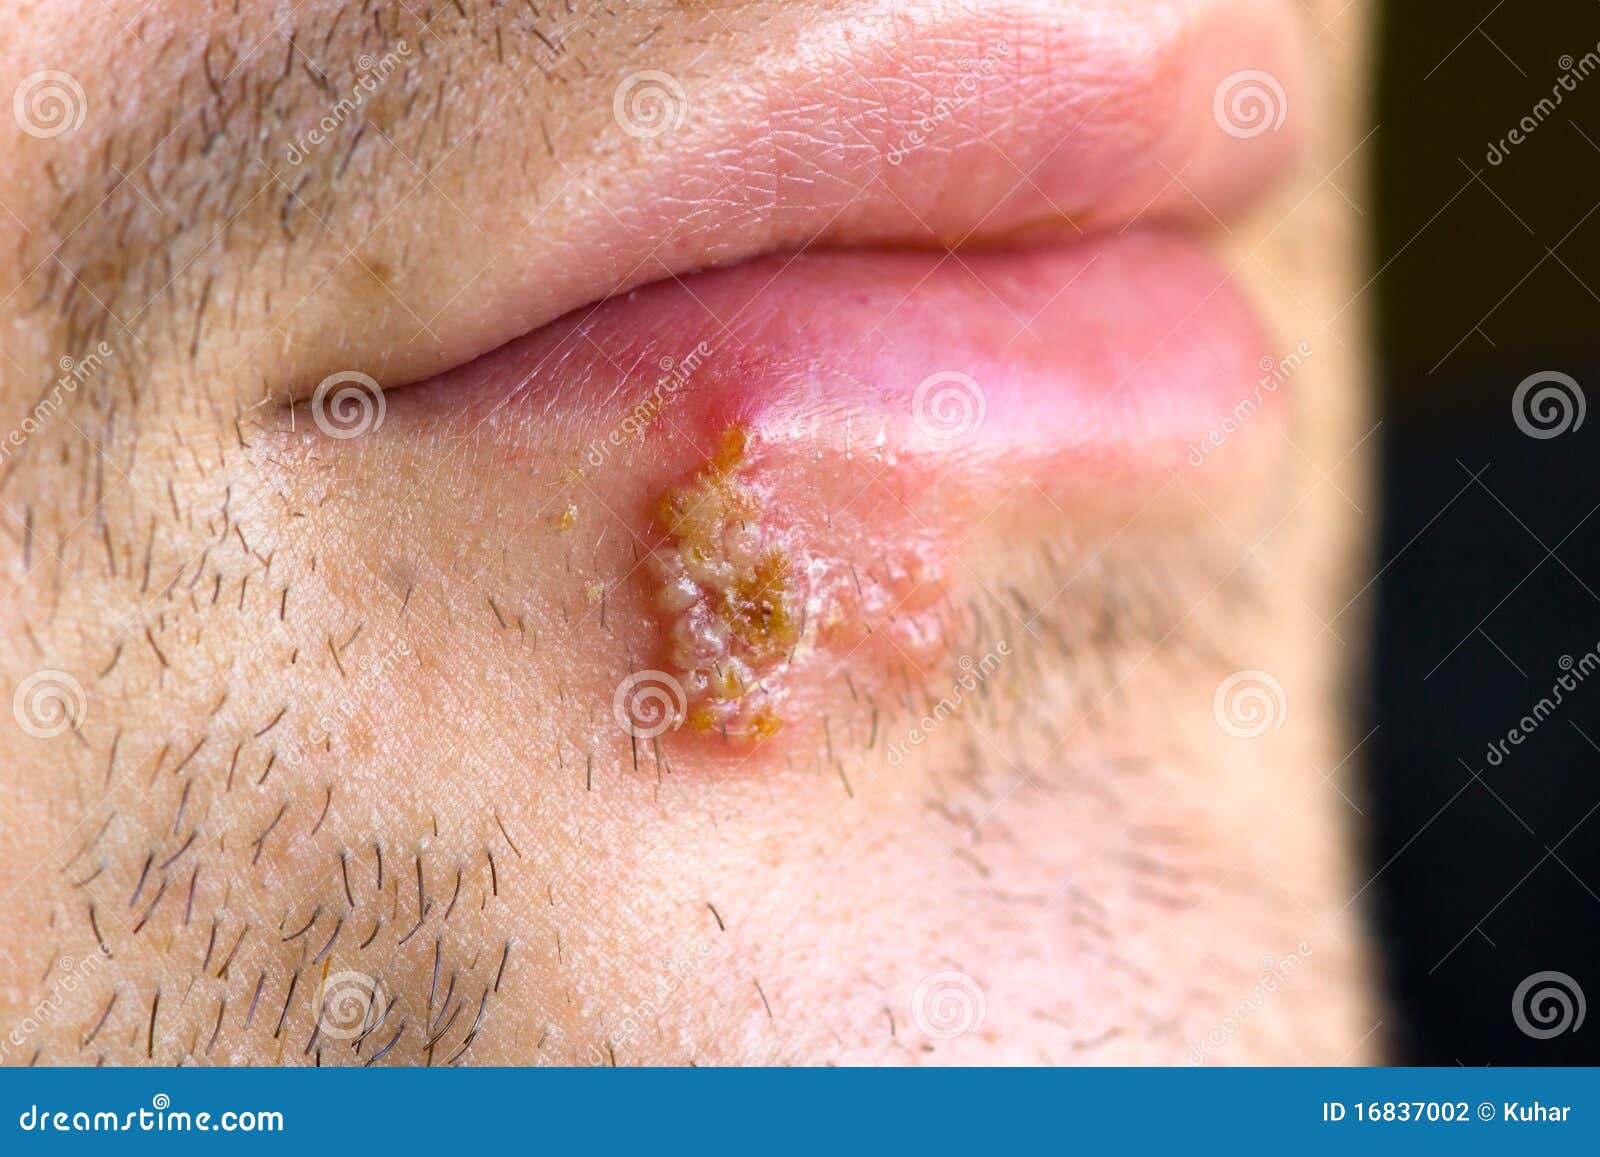 cold sores (herpes labialis)